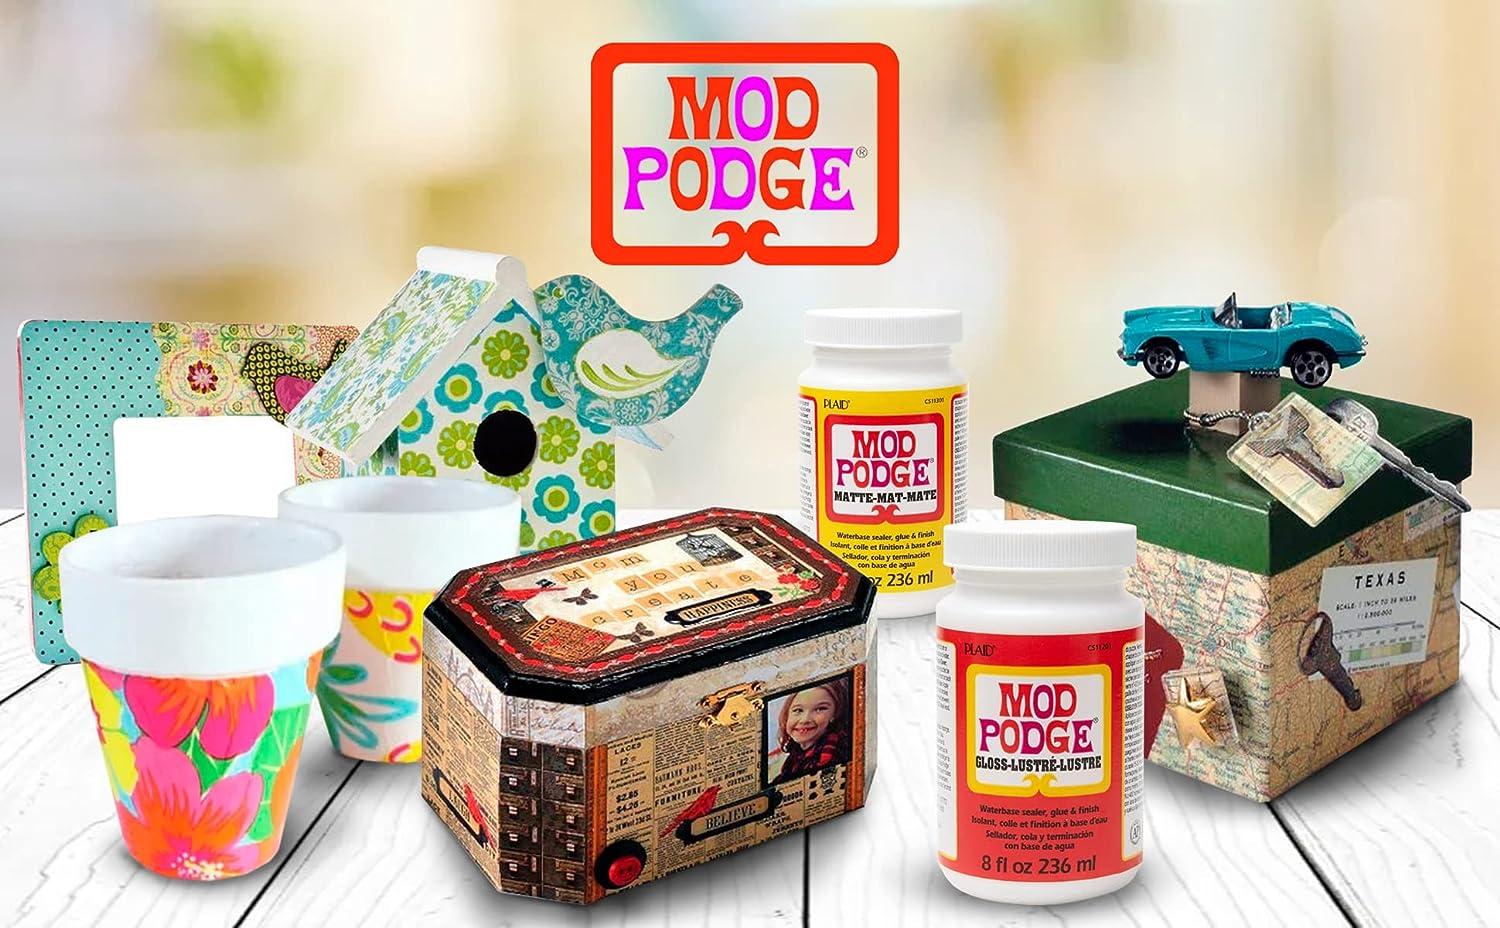 Mod Podge Puzzle Saver Glue Kit, Adhesive Brushes for Jigsaw Puzzles, Boards, Mats, Pixiss Accessory Kit with Glue Spreaders, Gloves, Brushes, Palette